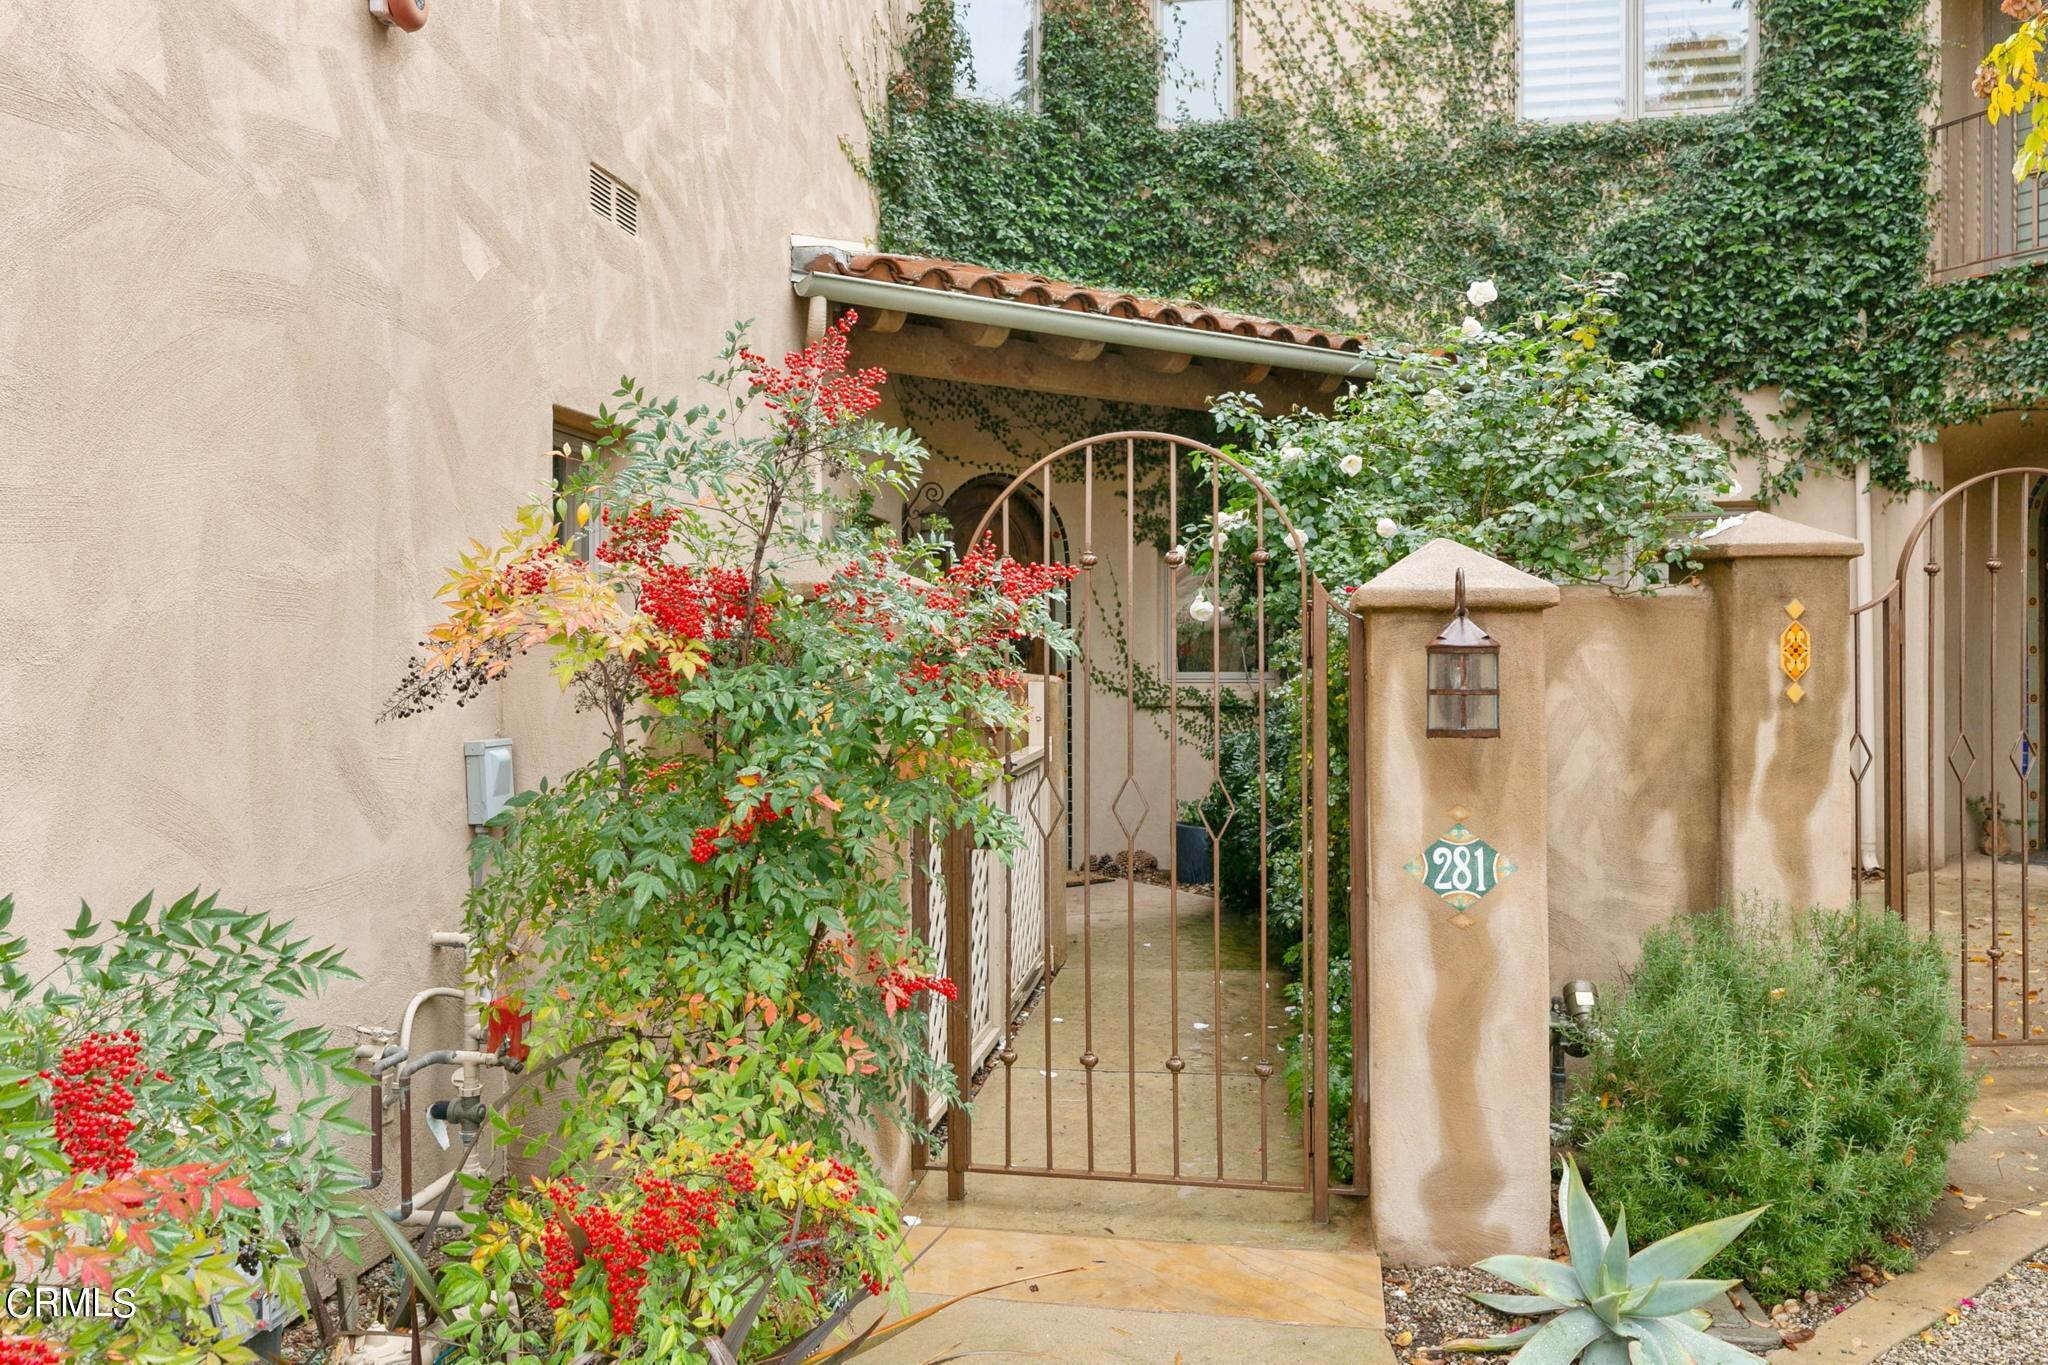 2. townhouses for Sale at 281 South Montgomery Street Ojai, California 93023 United States